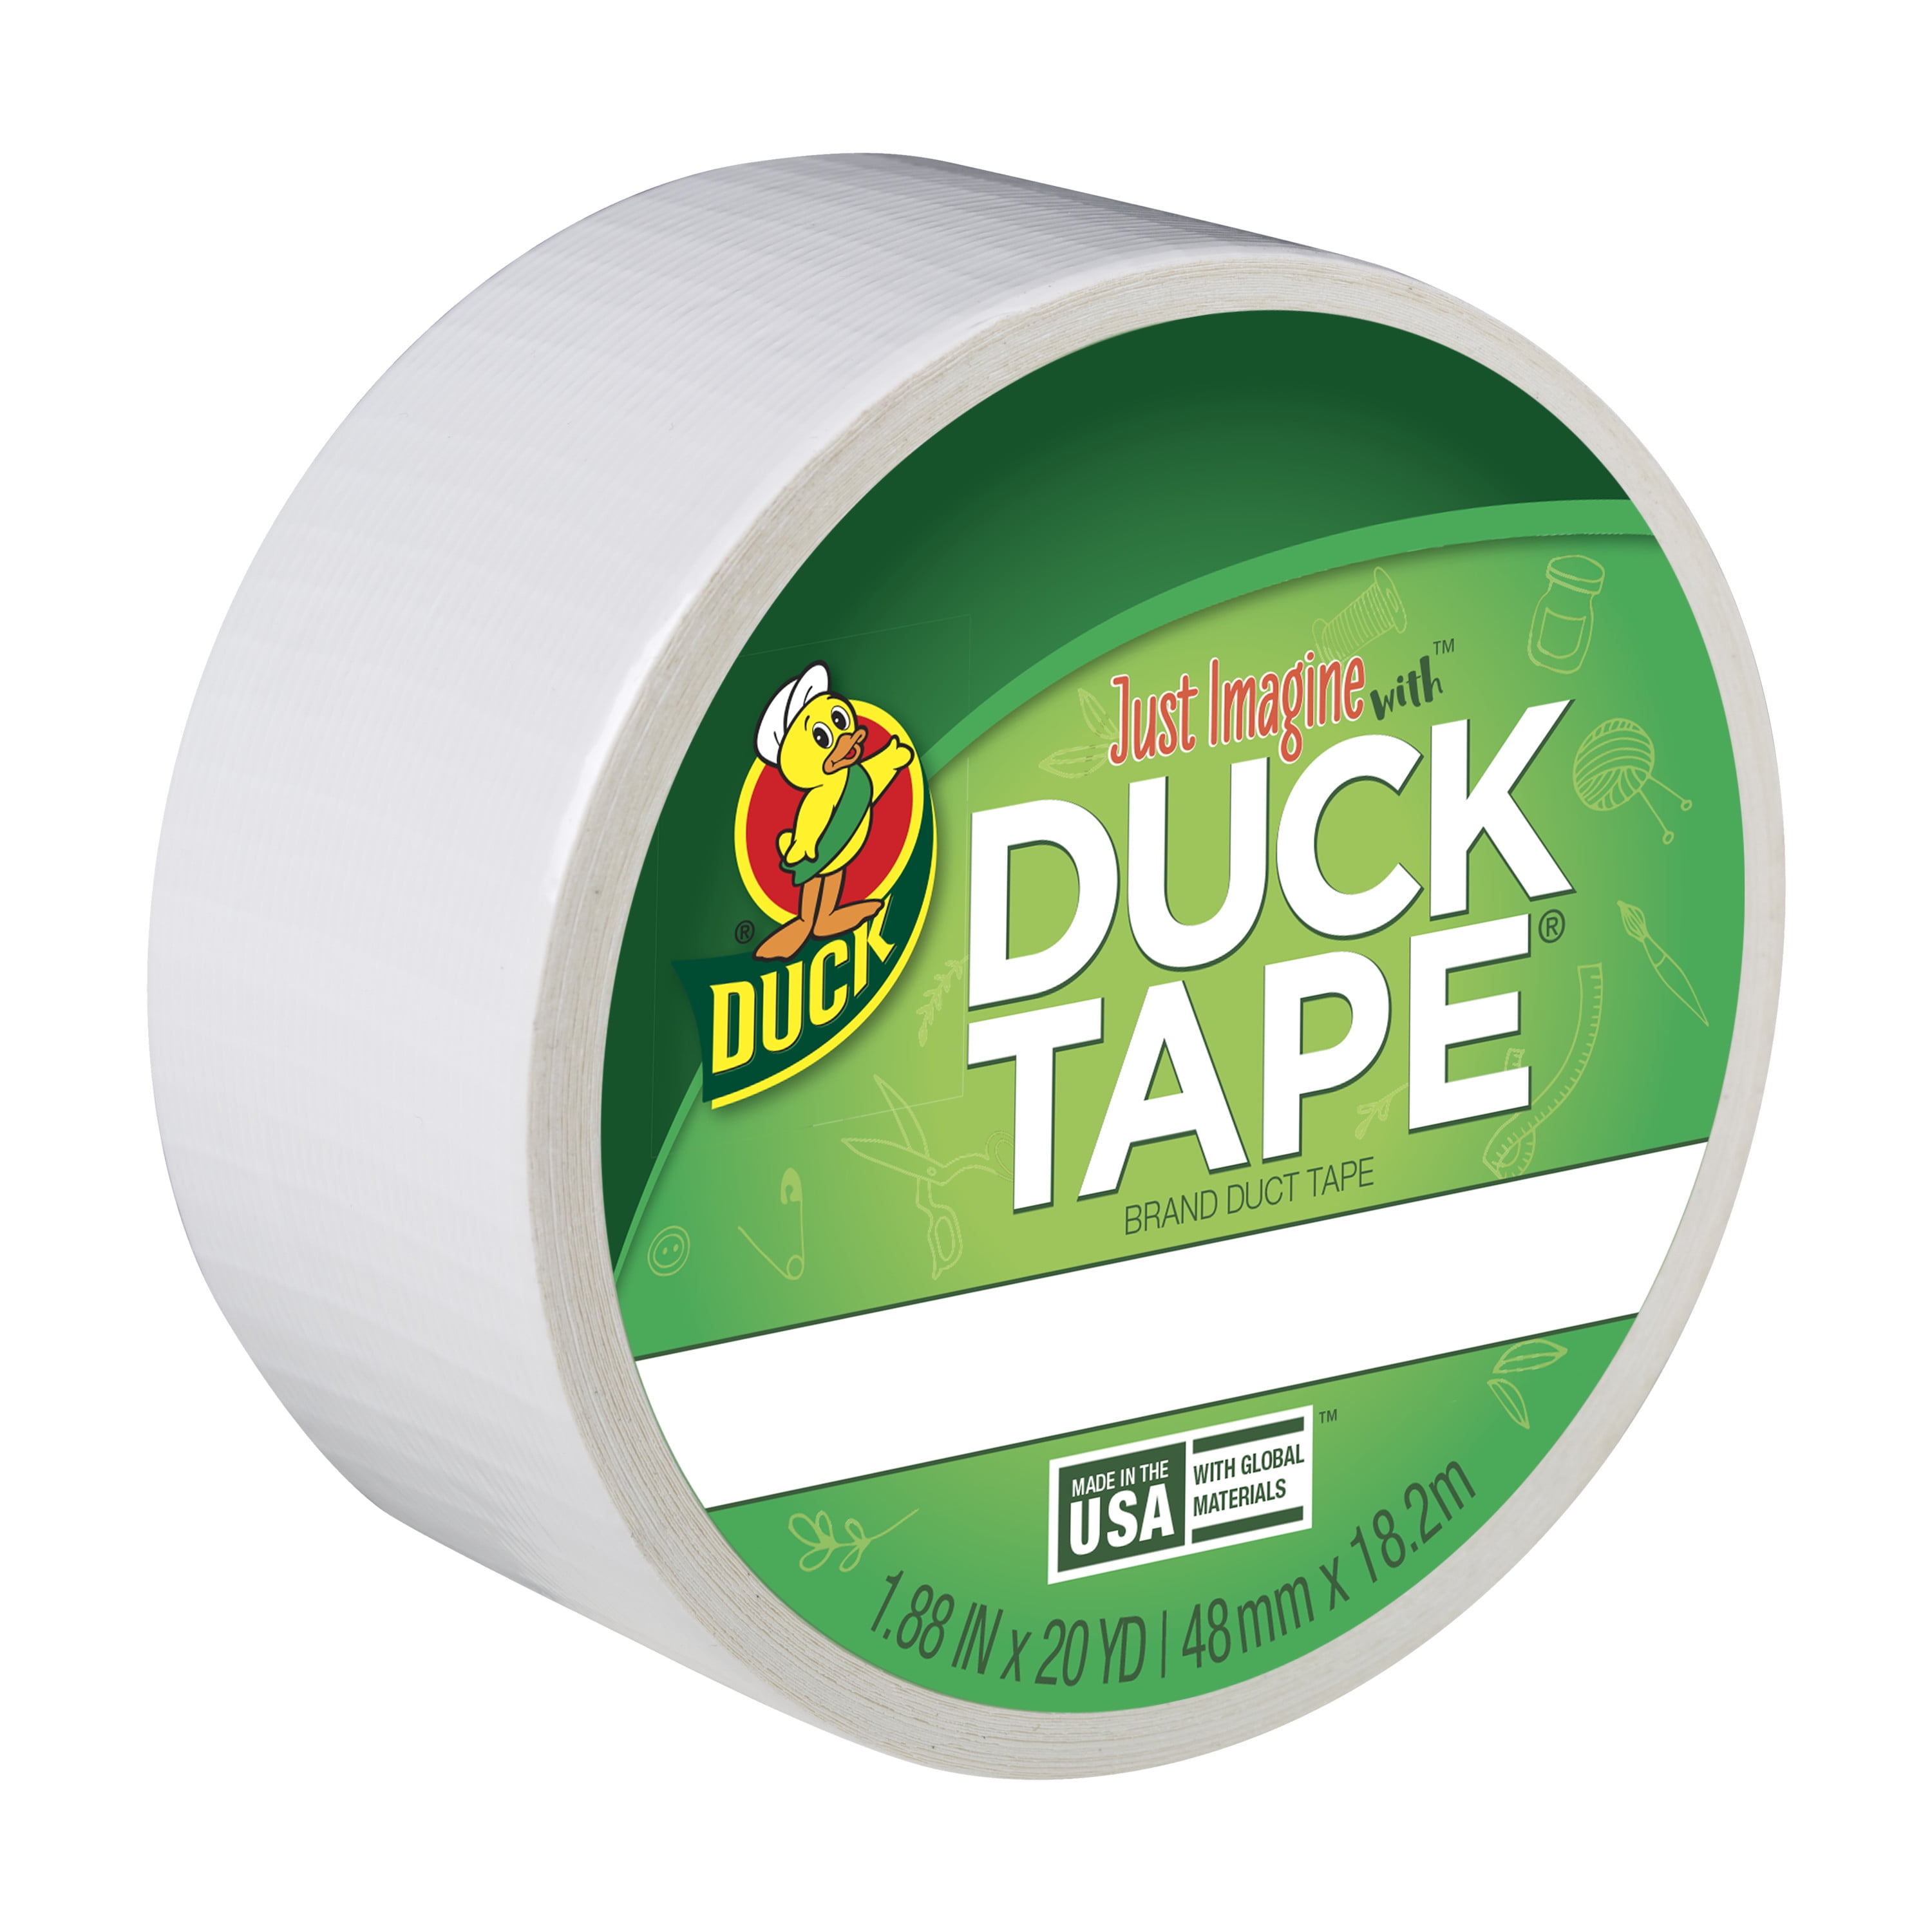 Duck Tape Heavy Duty Self-Adhesive Duct Tape, 1-7/8 Inches x 20